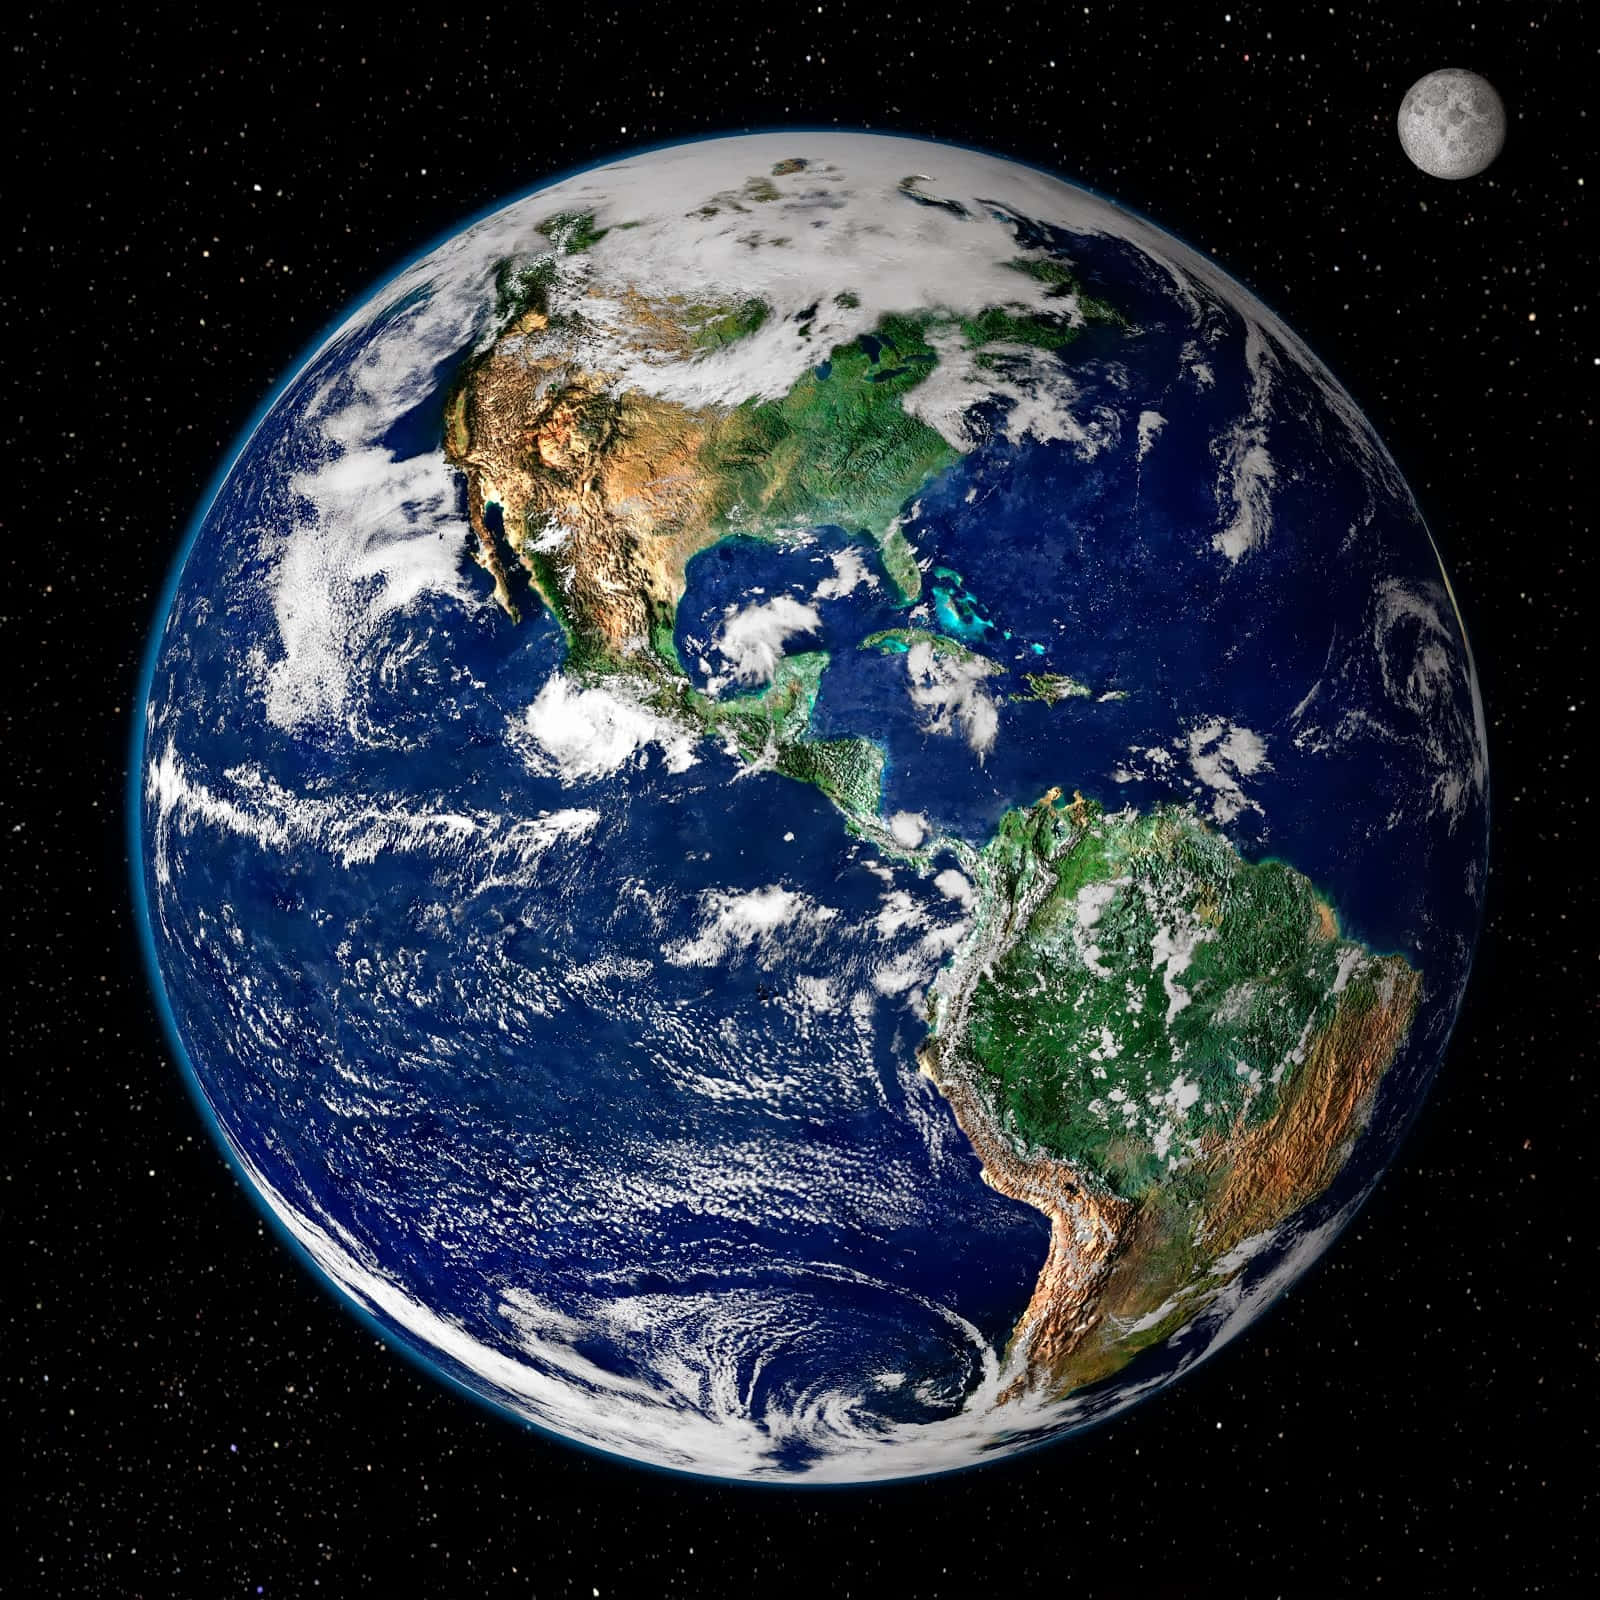 "A glimpse of our beautiful planet, Earth" Wallpaper